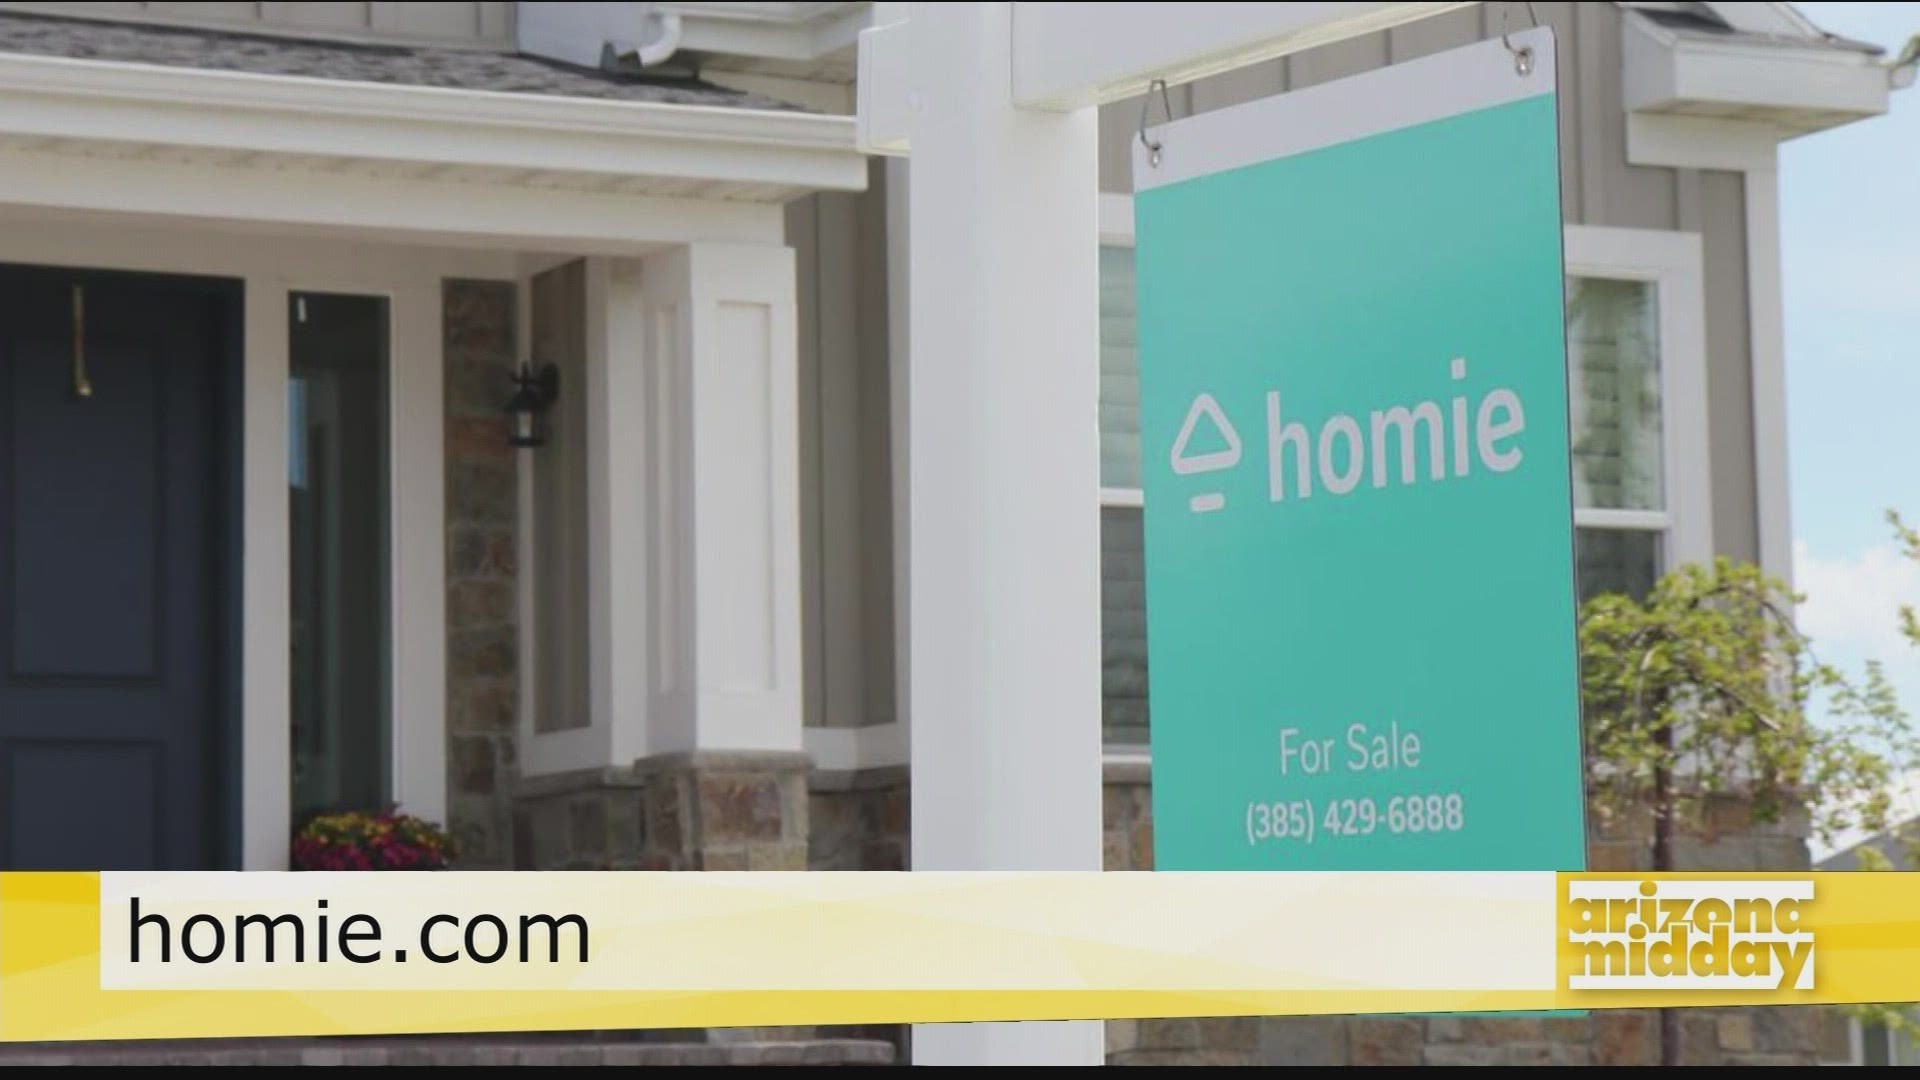 Wayne Graham, Head of Real Estate with Homie, shares the new way to buy and sell homes